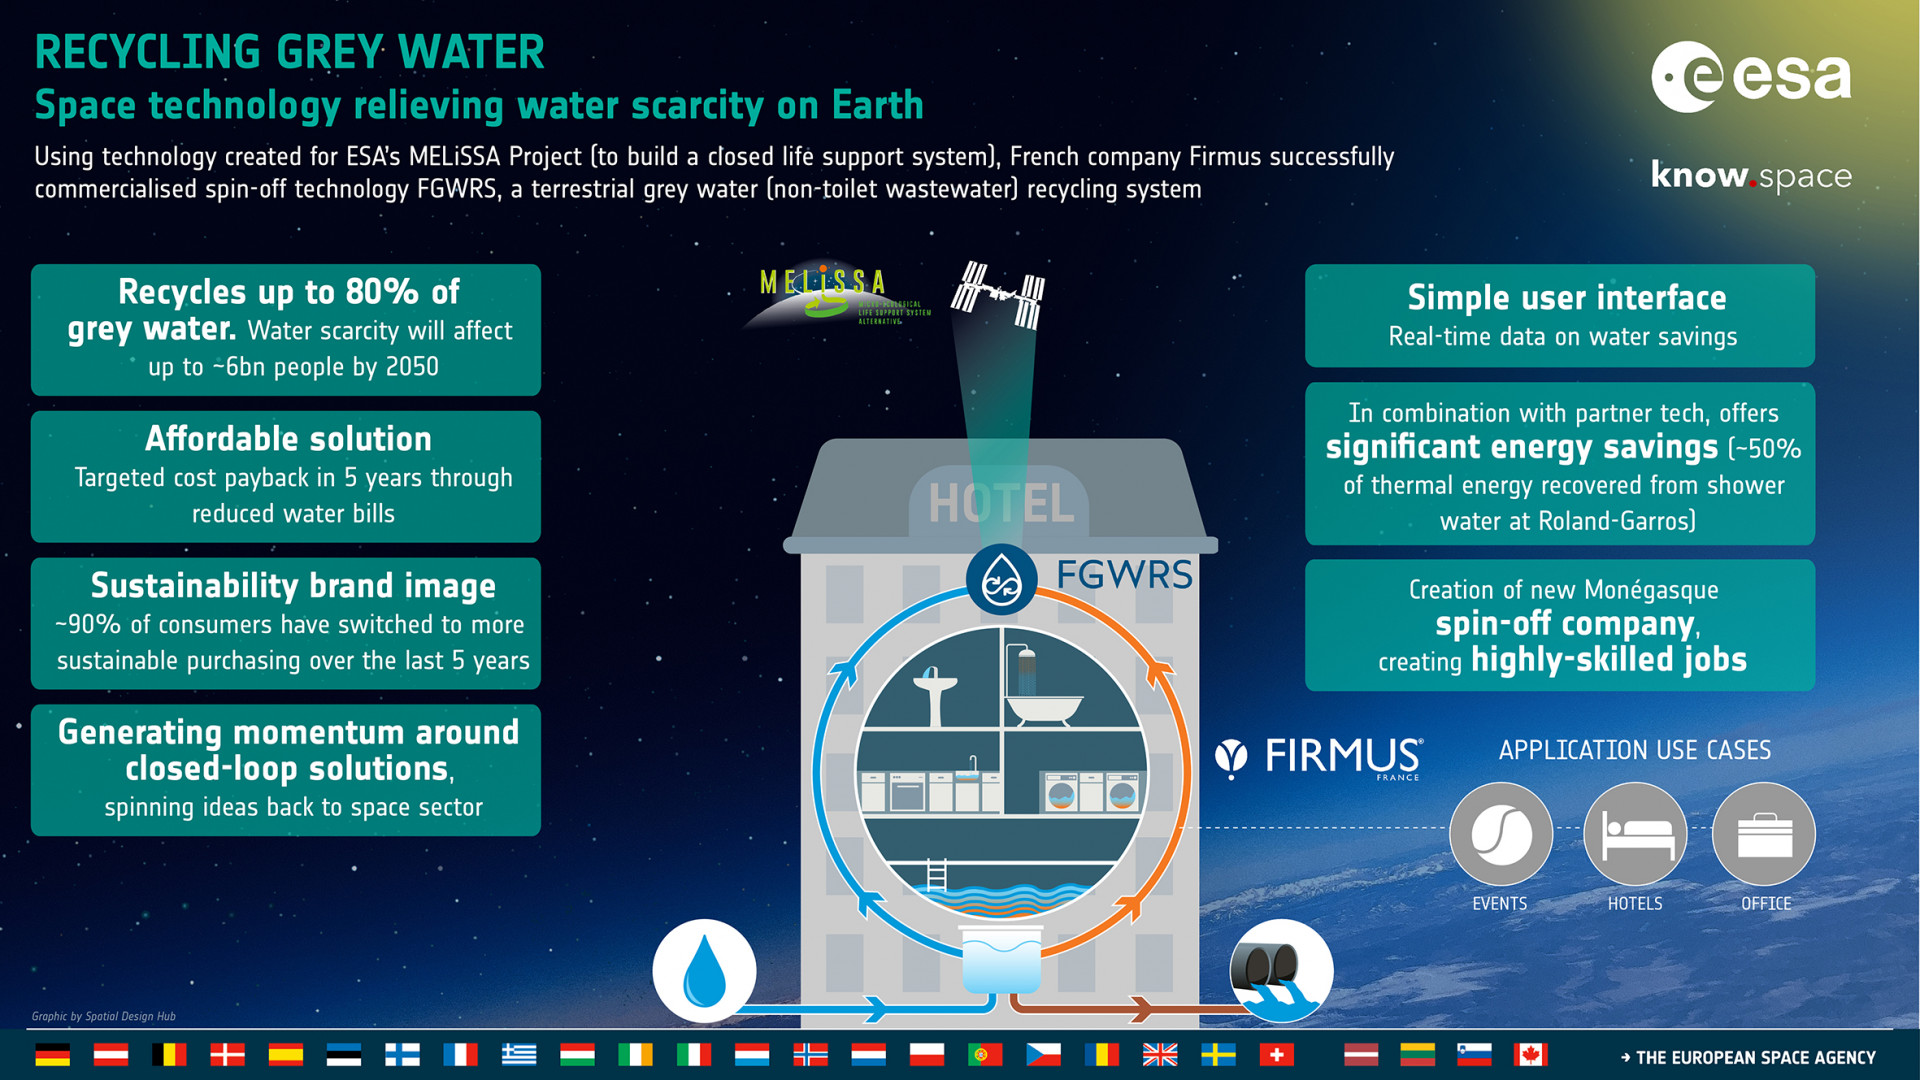 ESA Technology Transfer Success Story - Closing the loop: how space technology could relieve water scarcity on Earth